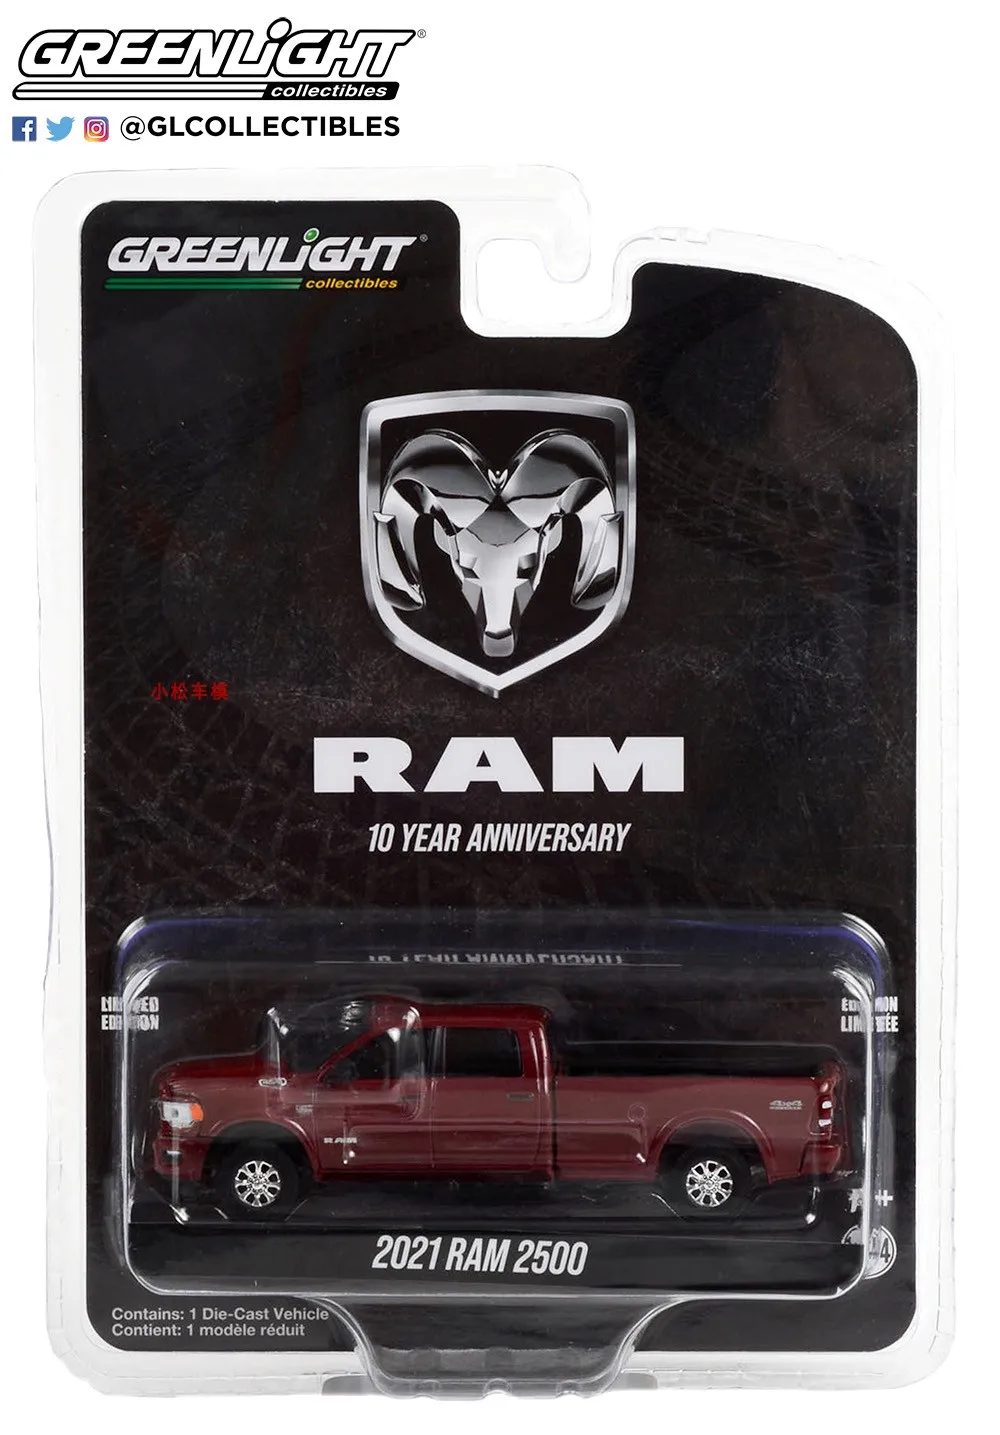 

GreenLight 1/64 Scale Diecast Car Toys 2021 Ram 2500 Pickup Truck Die-Cast Metal Vehicle Model Toy For Boys Kids Collection Gift